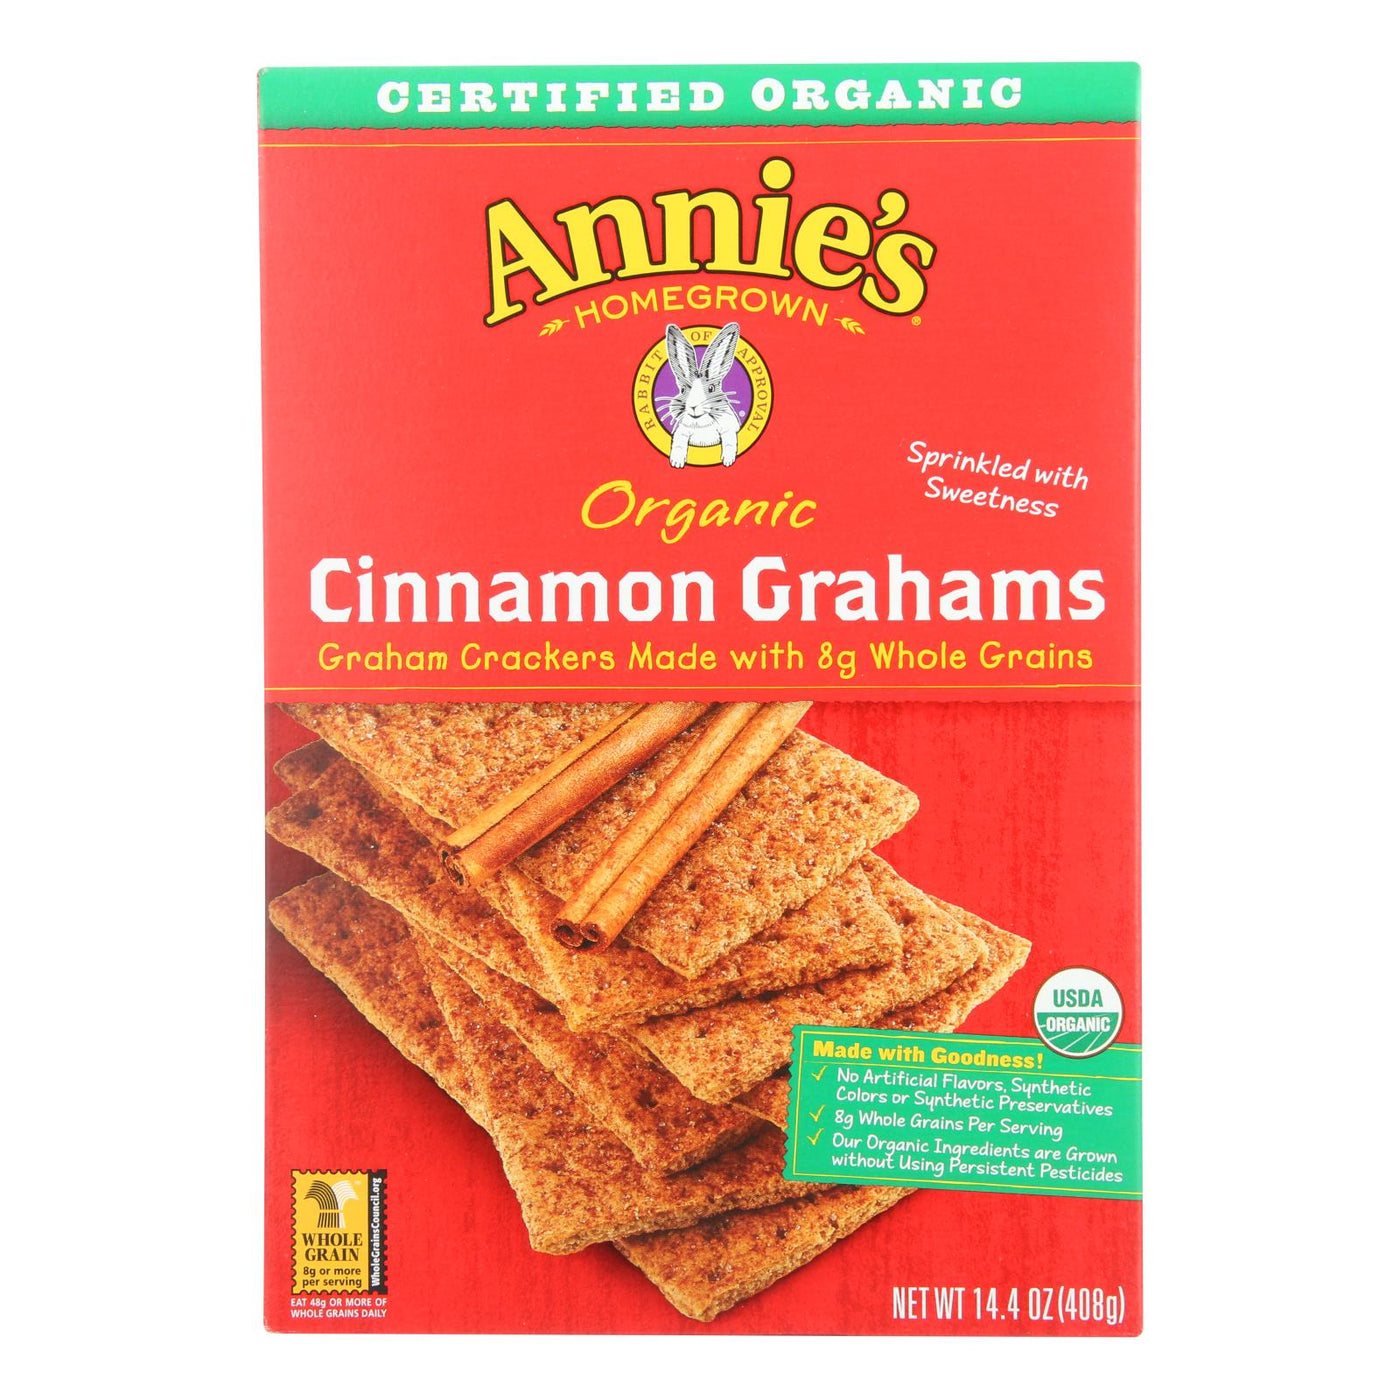 Annie's Homegrown Organic Cinnamon Graham Crackers - Case Of 12 - 14.4 Oz. | OnlyNaturals.us